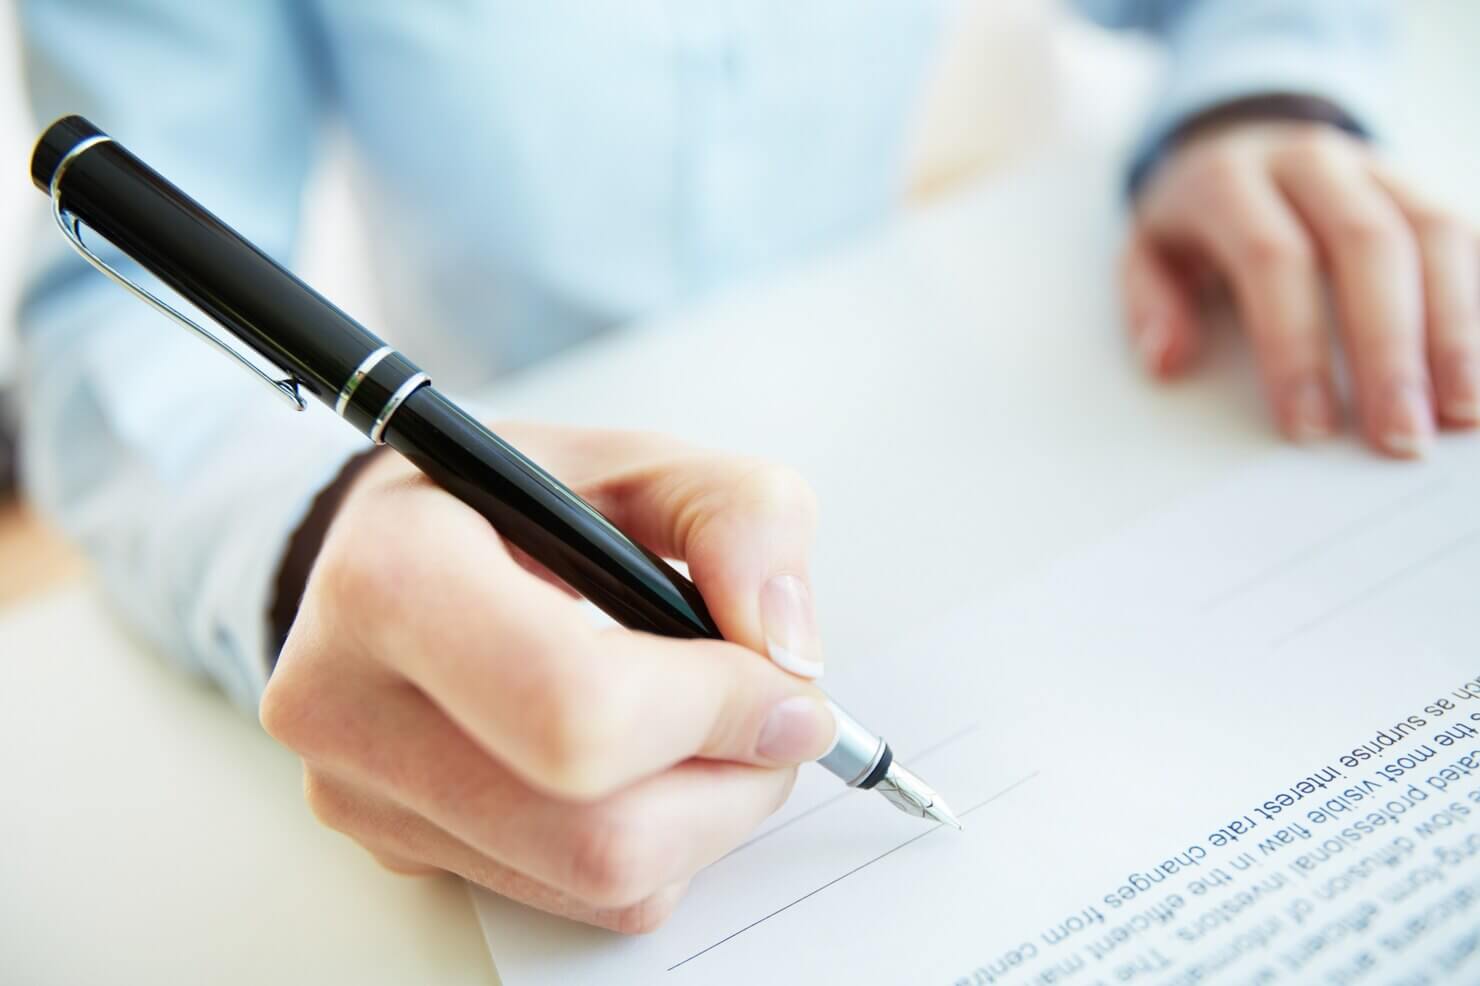 Signing a contract with a staff augmentation provider